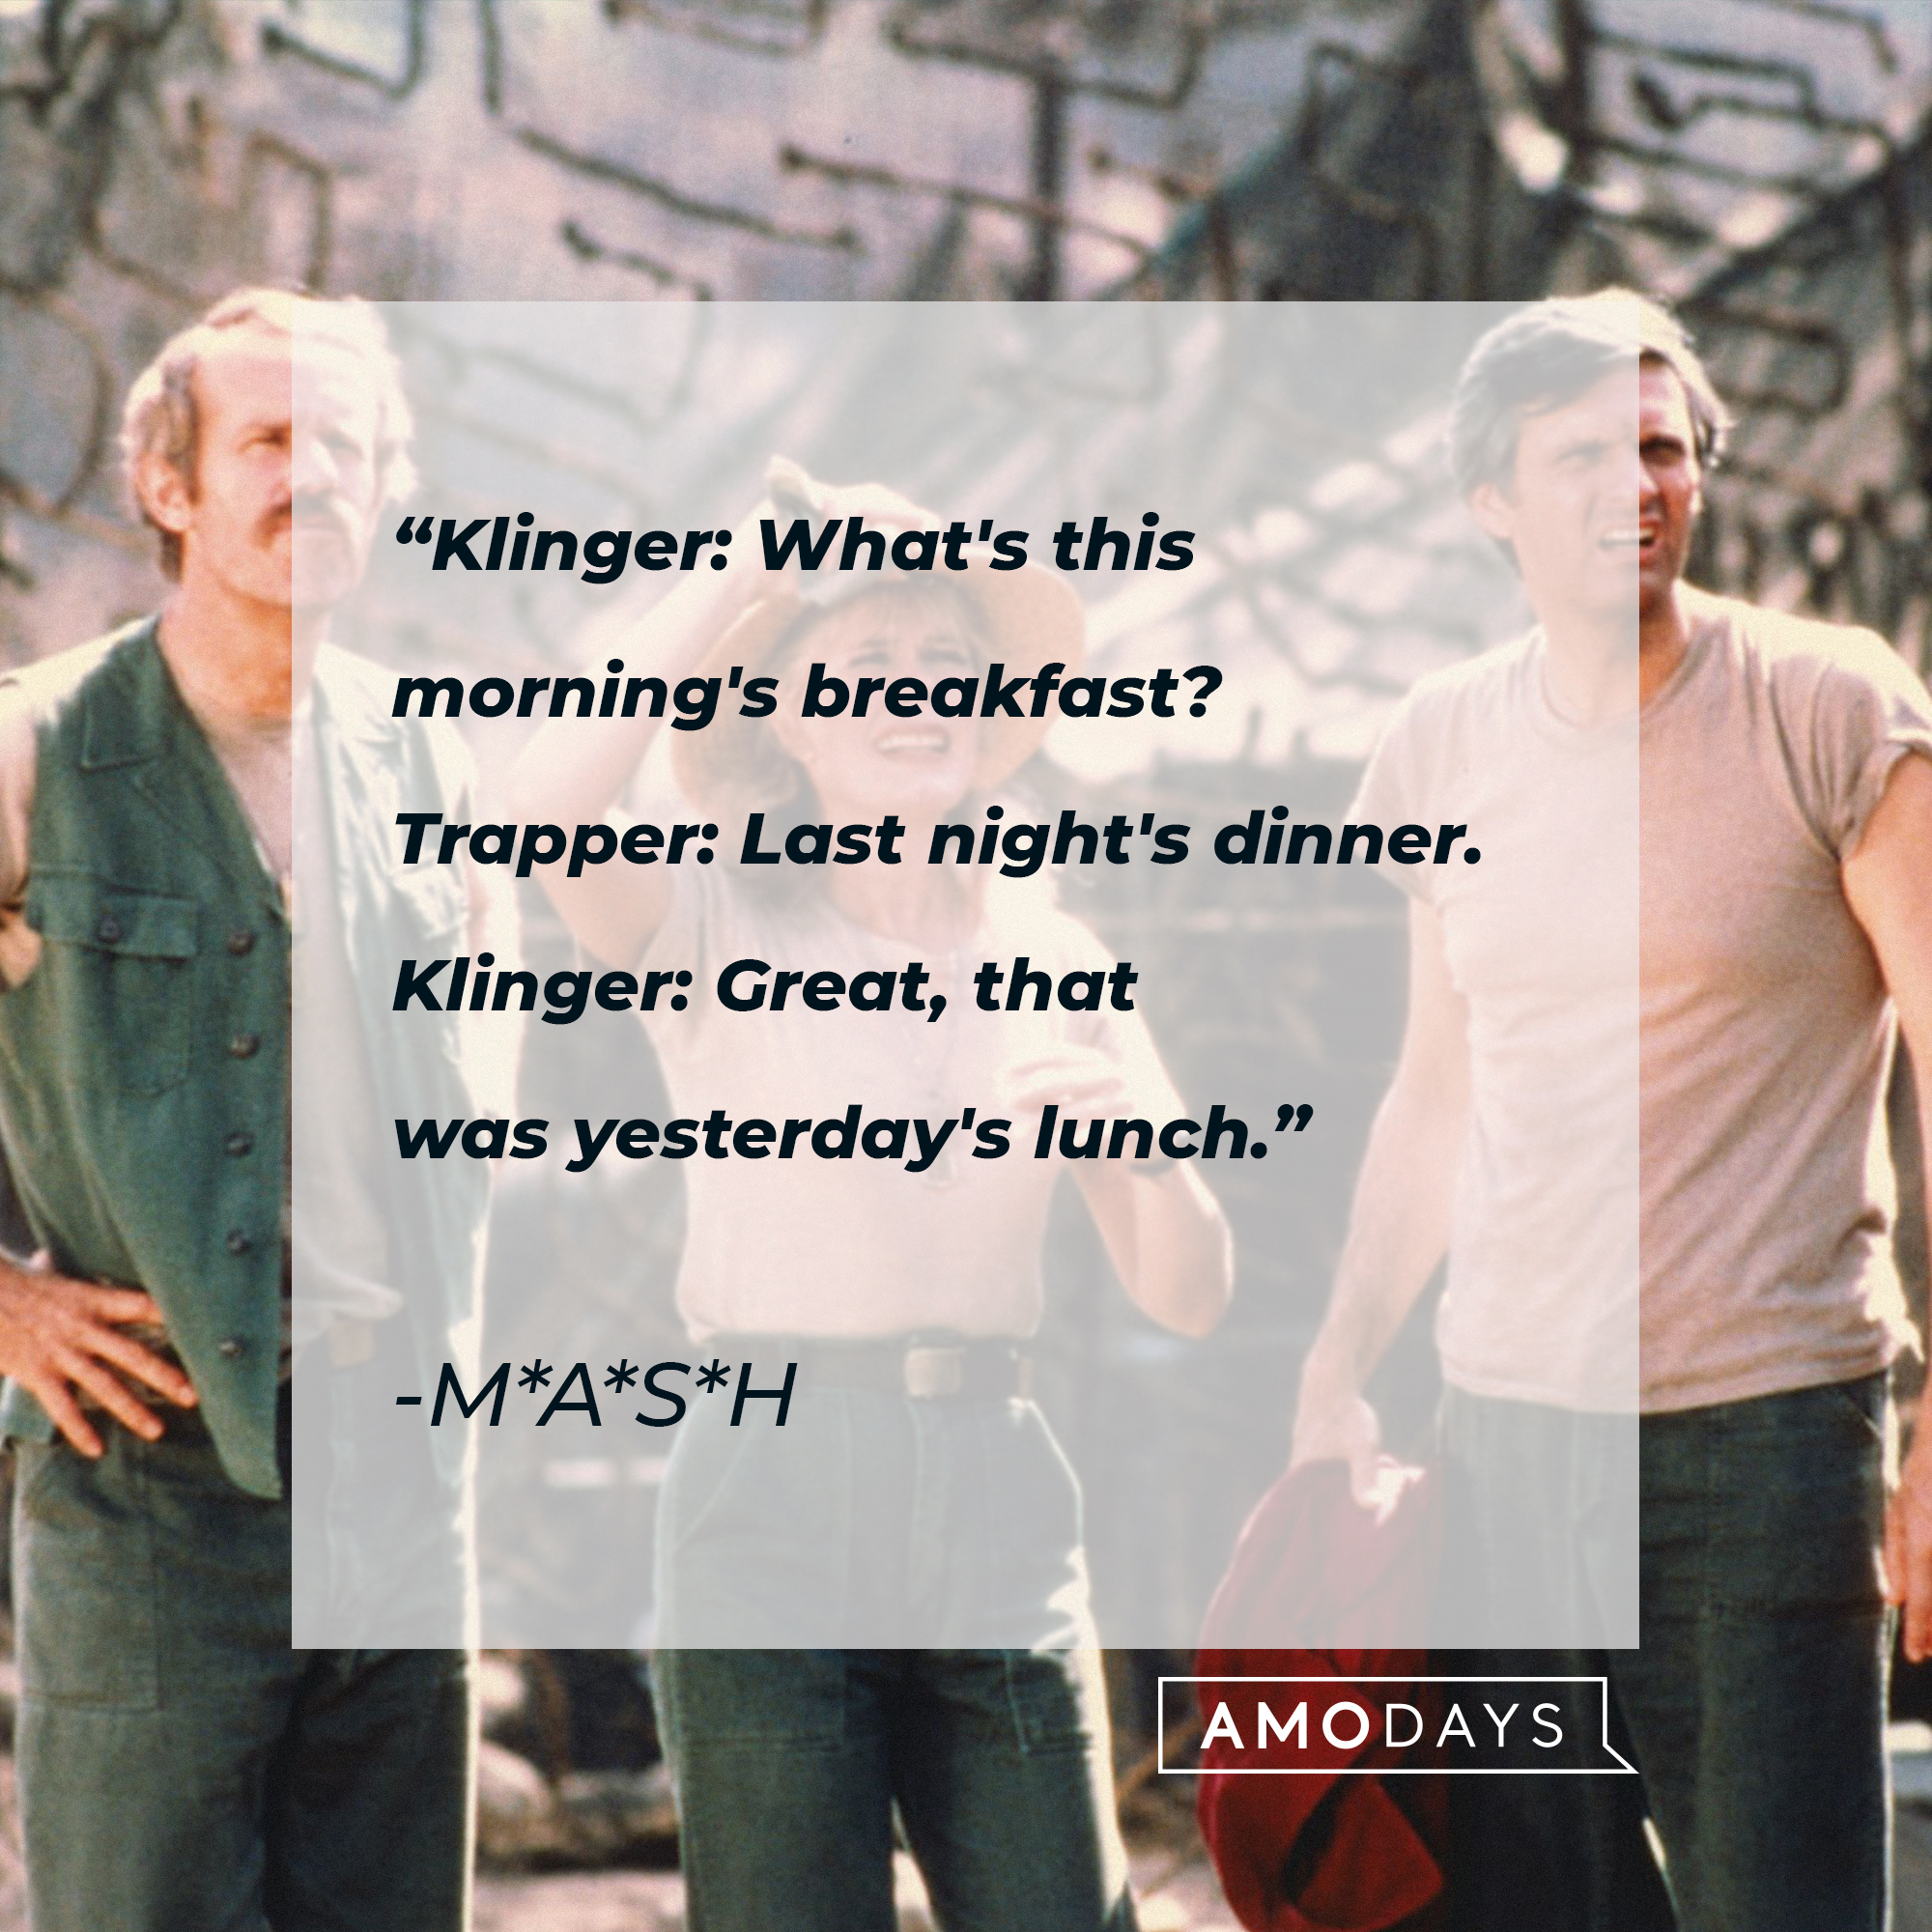 "M*A*S*H"'s quote: "Klinger: What's this morning's breakfast? / Trapper: Last night's dinner. / Klinger: Great, that was yesterday's lunch." | Source: Getty Images